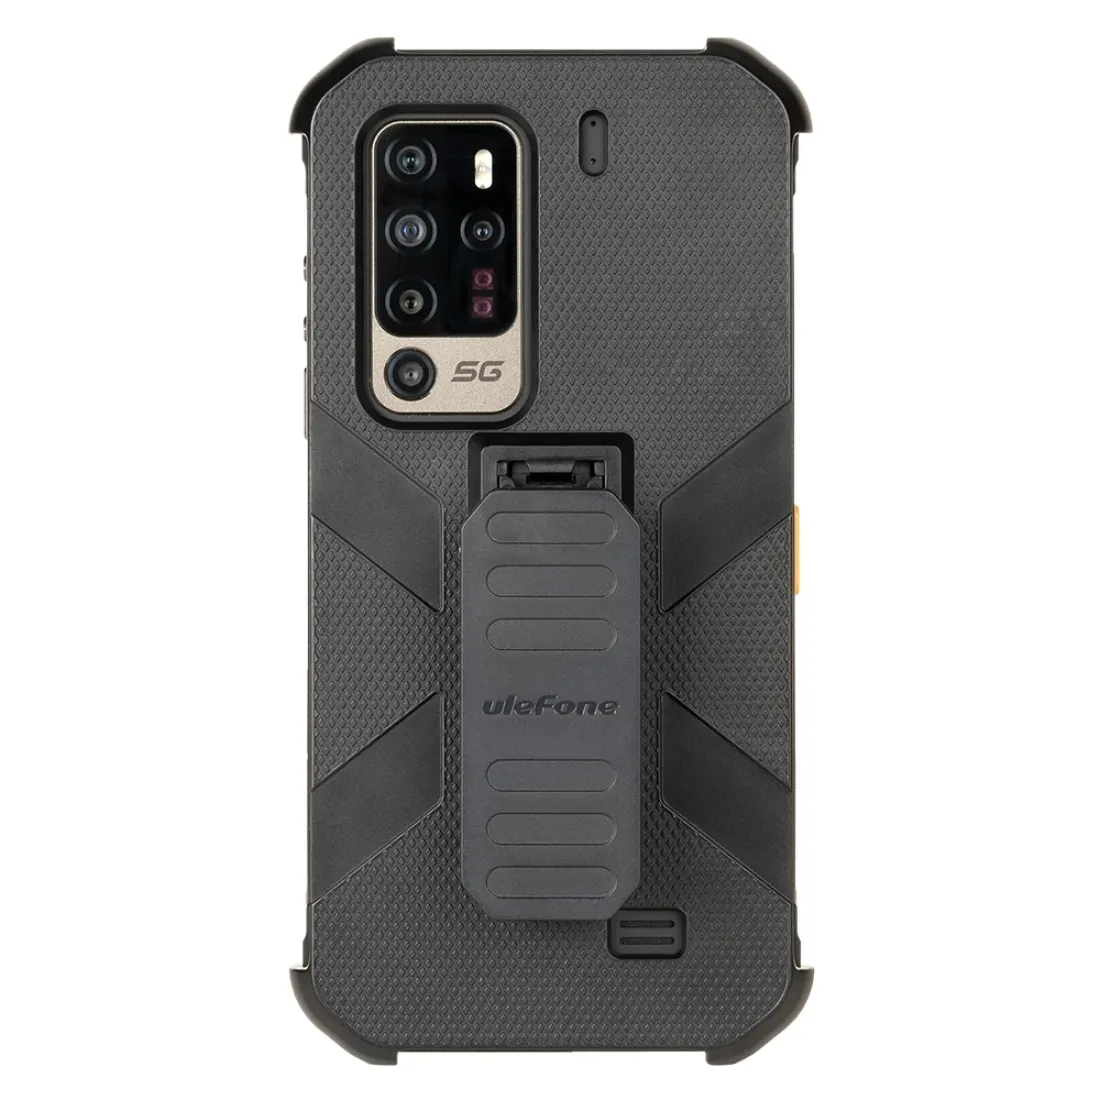 Original Factory Ulefone Armor 11 Waterproof 5G Rugged Phone Professional Protective Case come with Back Clip & Carabiner